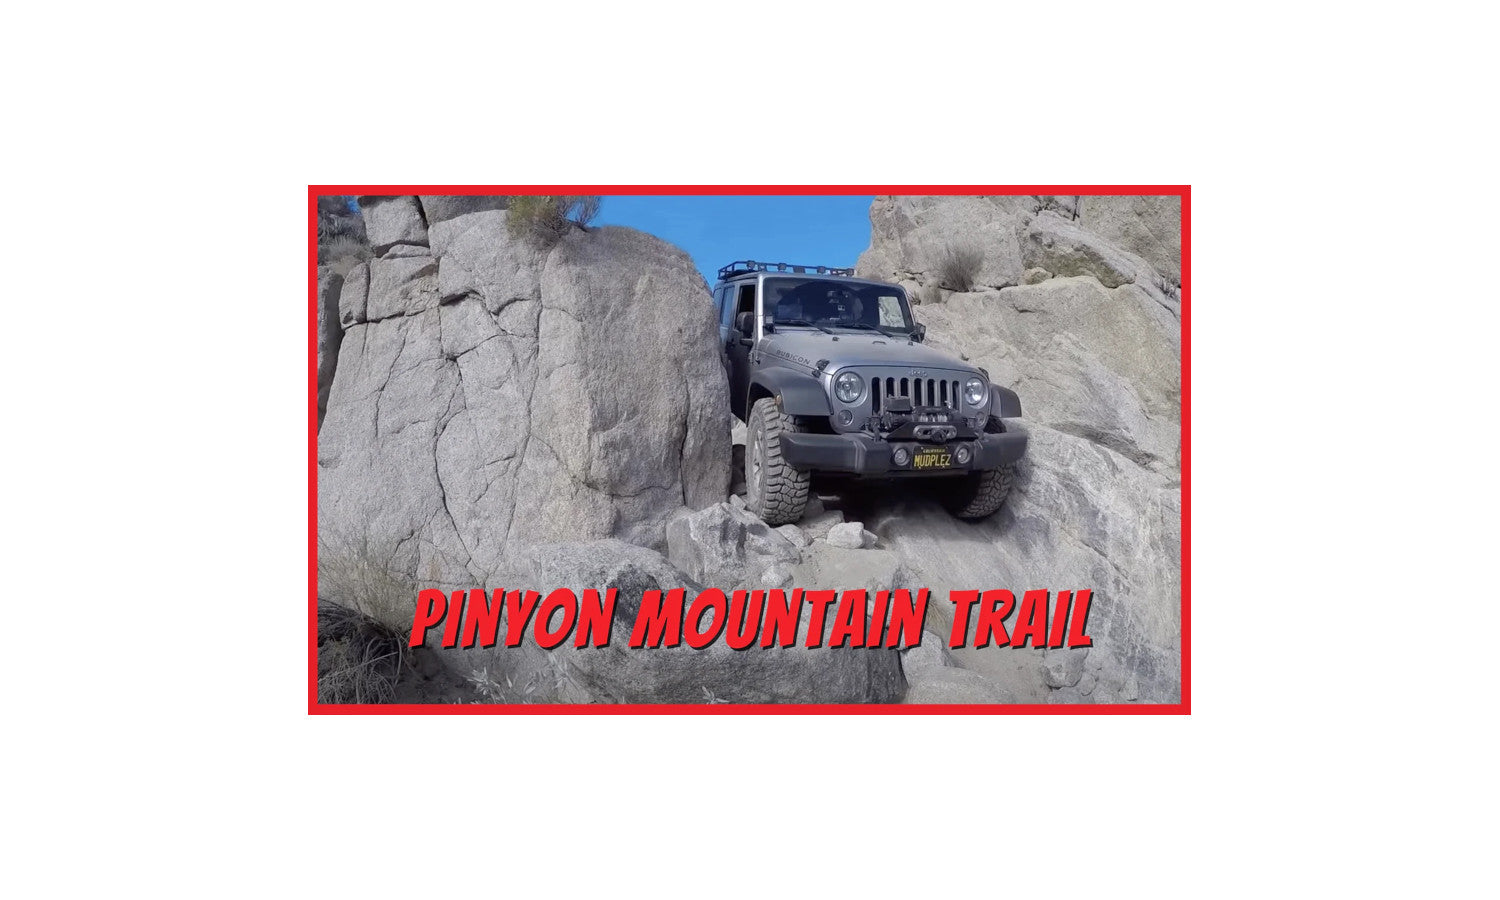 Excitement Ahead on the Pinyon Mountain Jeep Badge of Honor 4x4 Trail